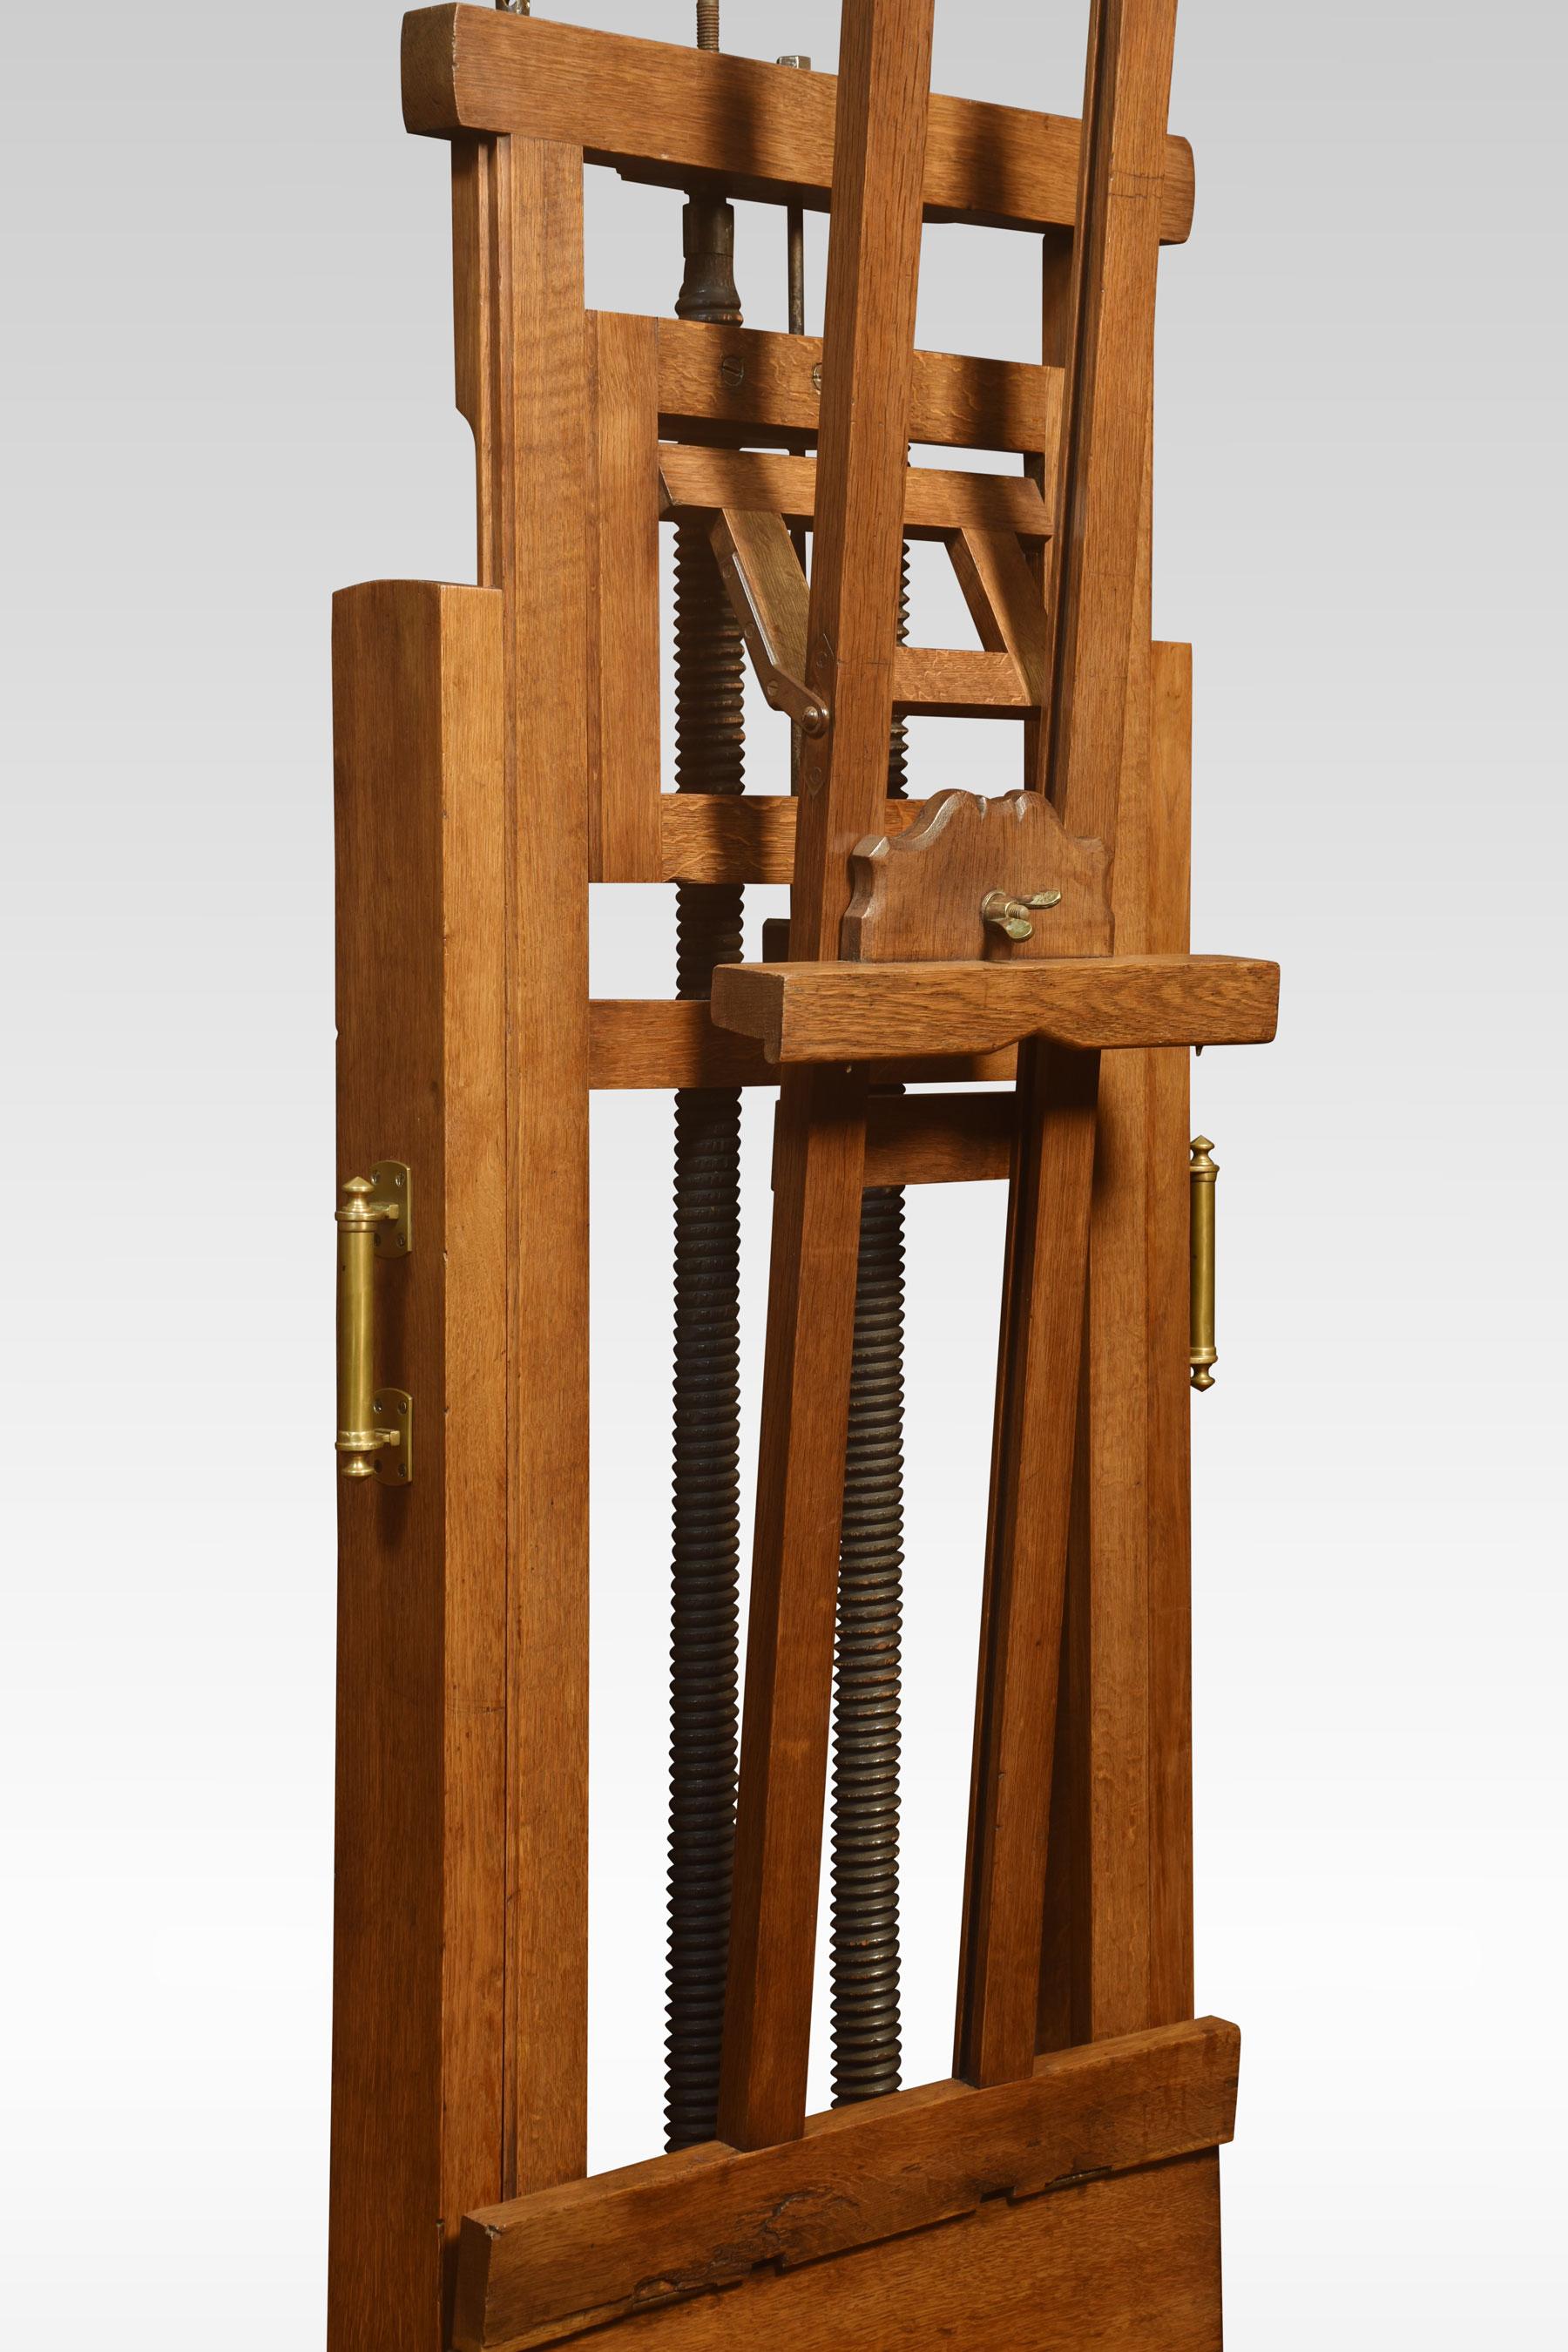 Large oak artist’s fully adjustable studio easel raised up on trestle base terminating in four casters
Dimensions
Height 66 Inches ajustable to 99 Inches
Width 25.5 Inches
Depth 25.5 Inches.